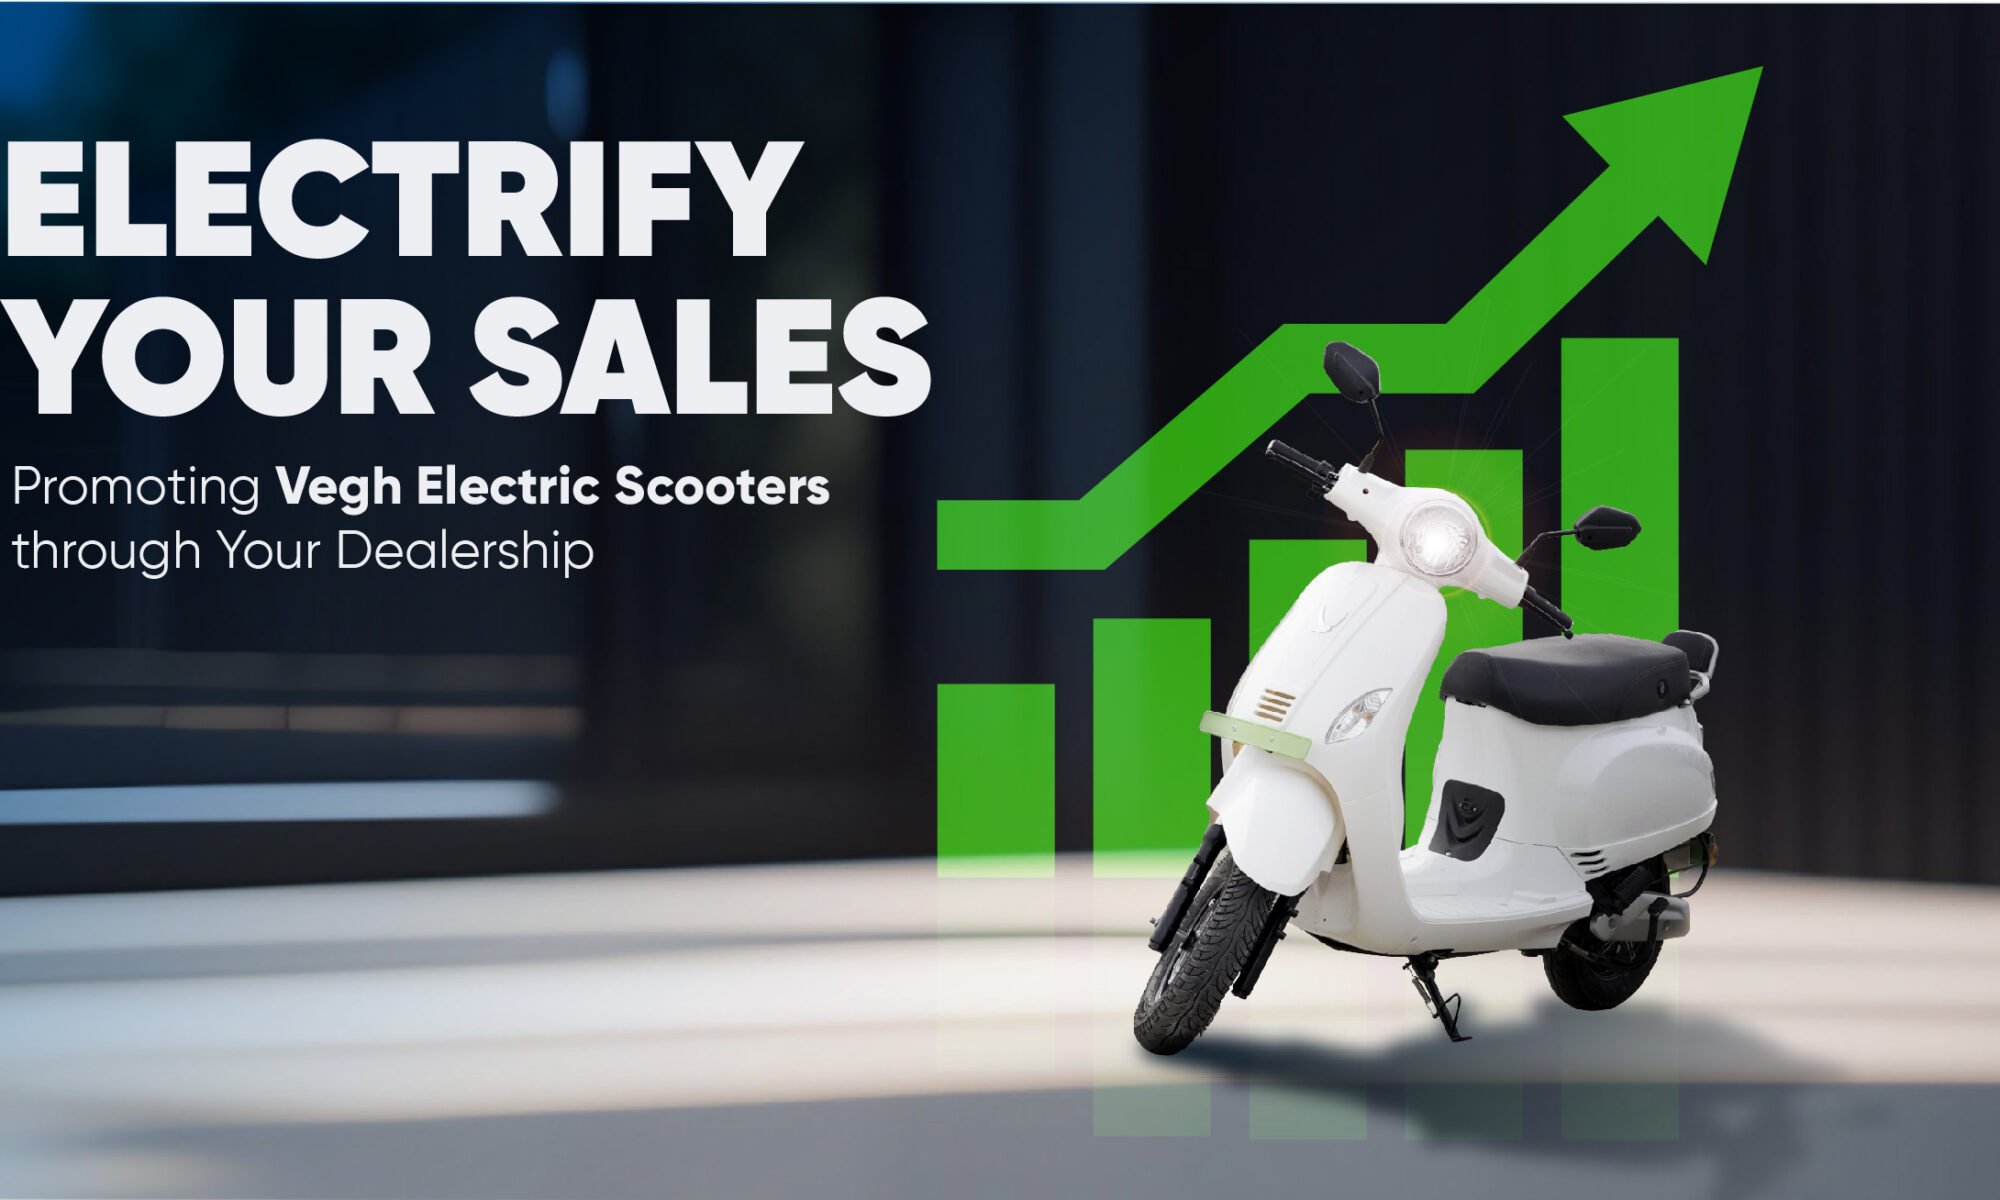 Promoting Vegh Electric Scooters through Your Dealership